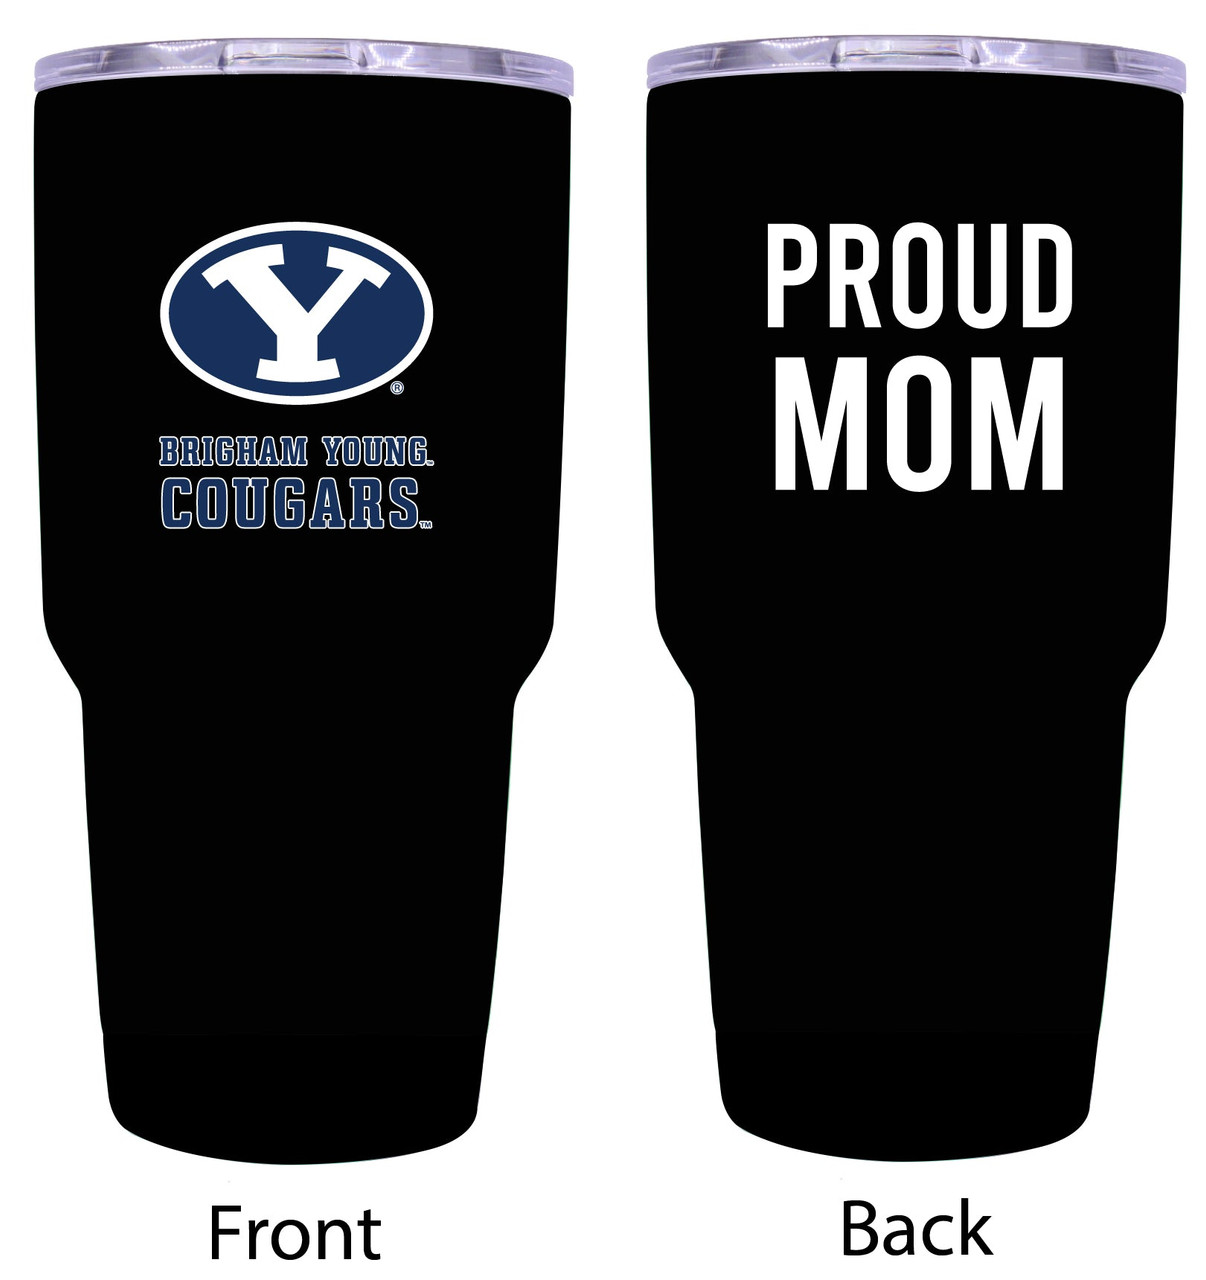 Brigham Young Cougars Proud Mom 24 oz Insulated Stainless Steel Tumblers Choose Your Color.